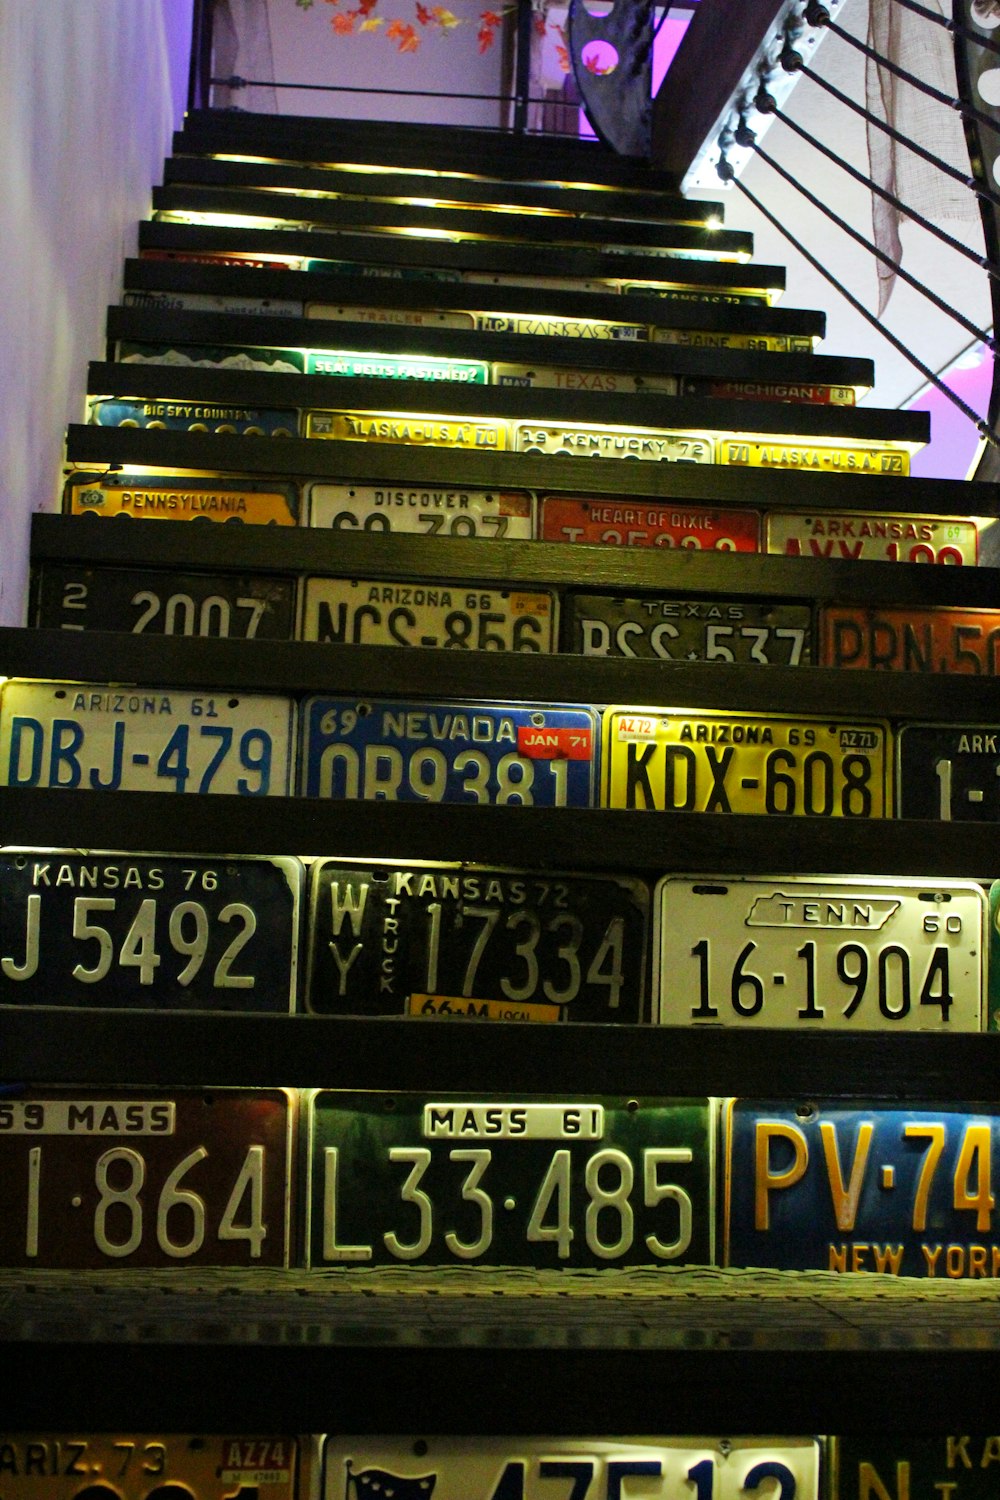 staircase with plate numbers as decoration